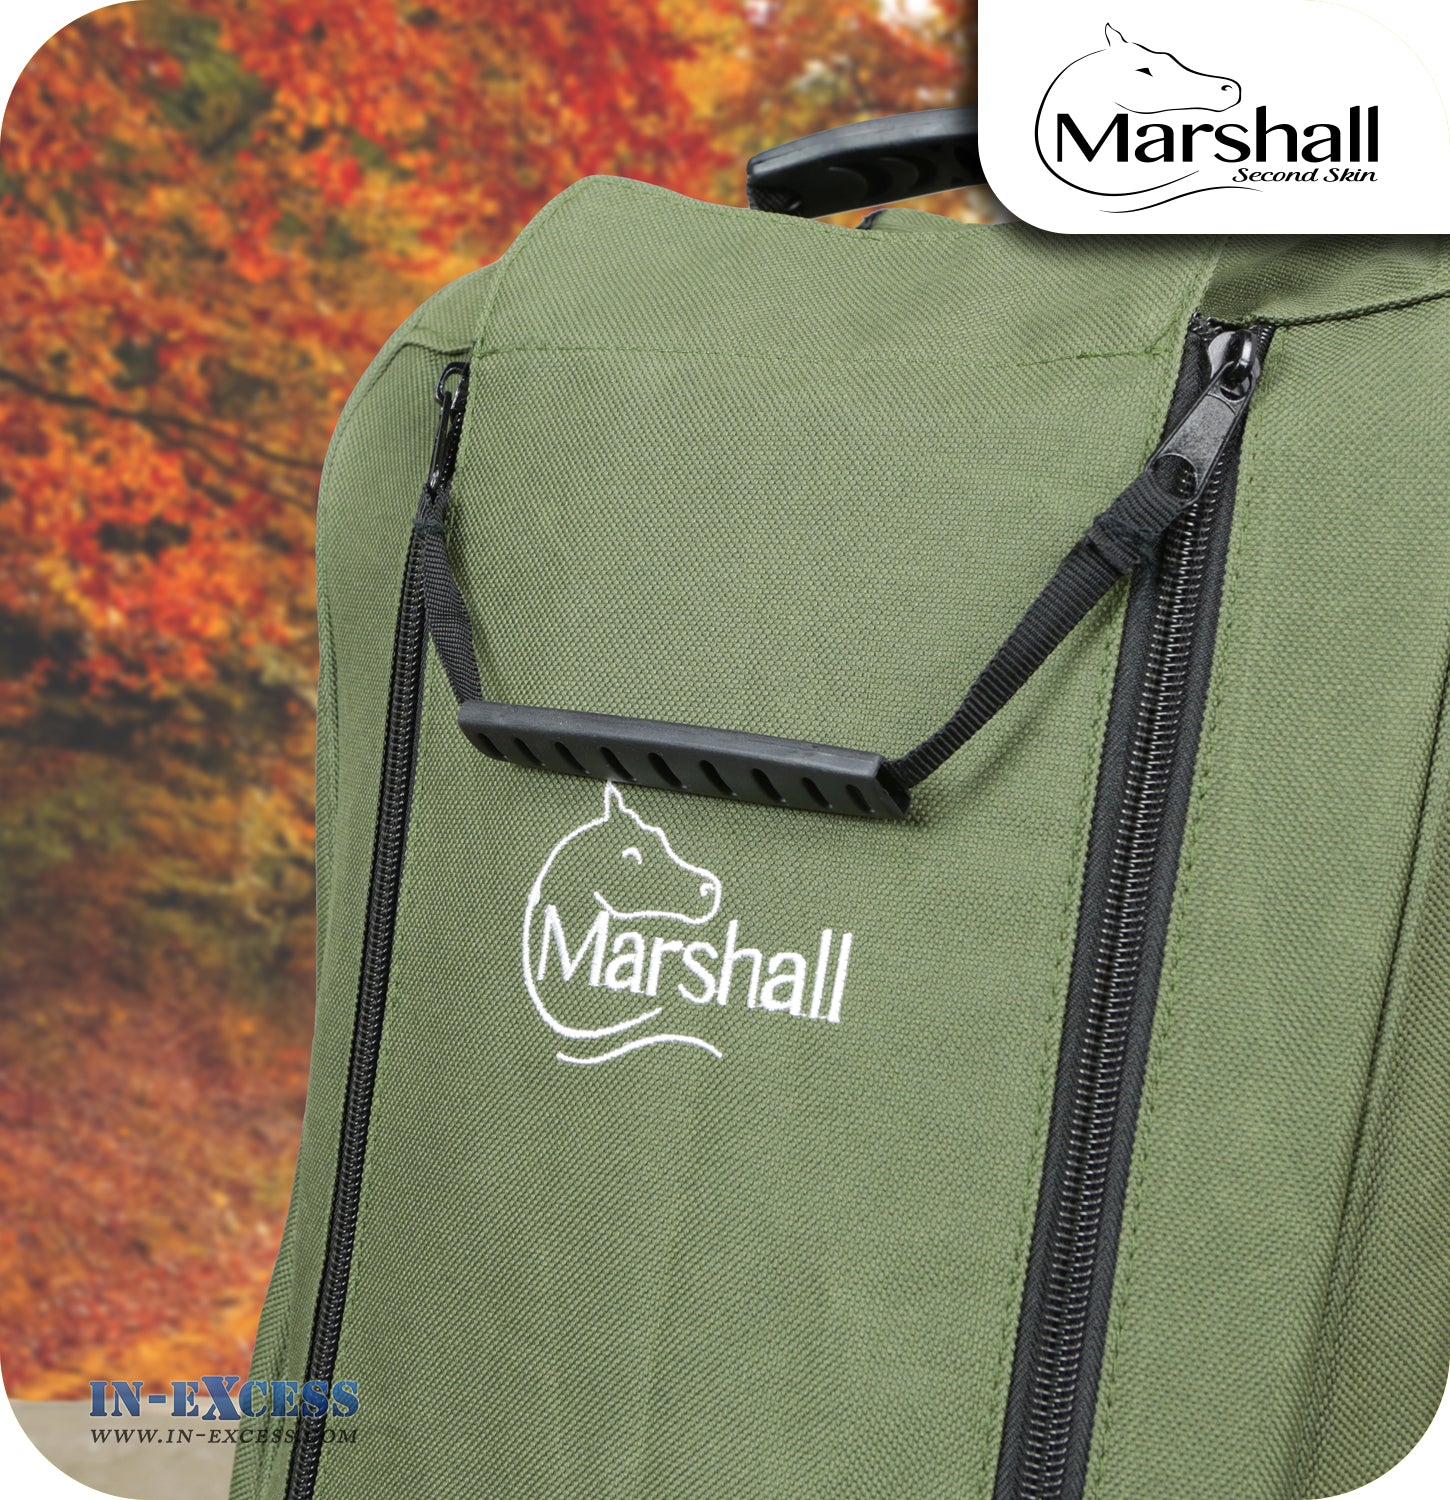 Marshall Unisex Lined Wellington Walking Boot Carrying Bag - Olive Green